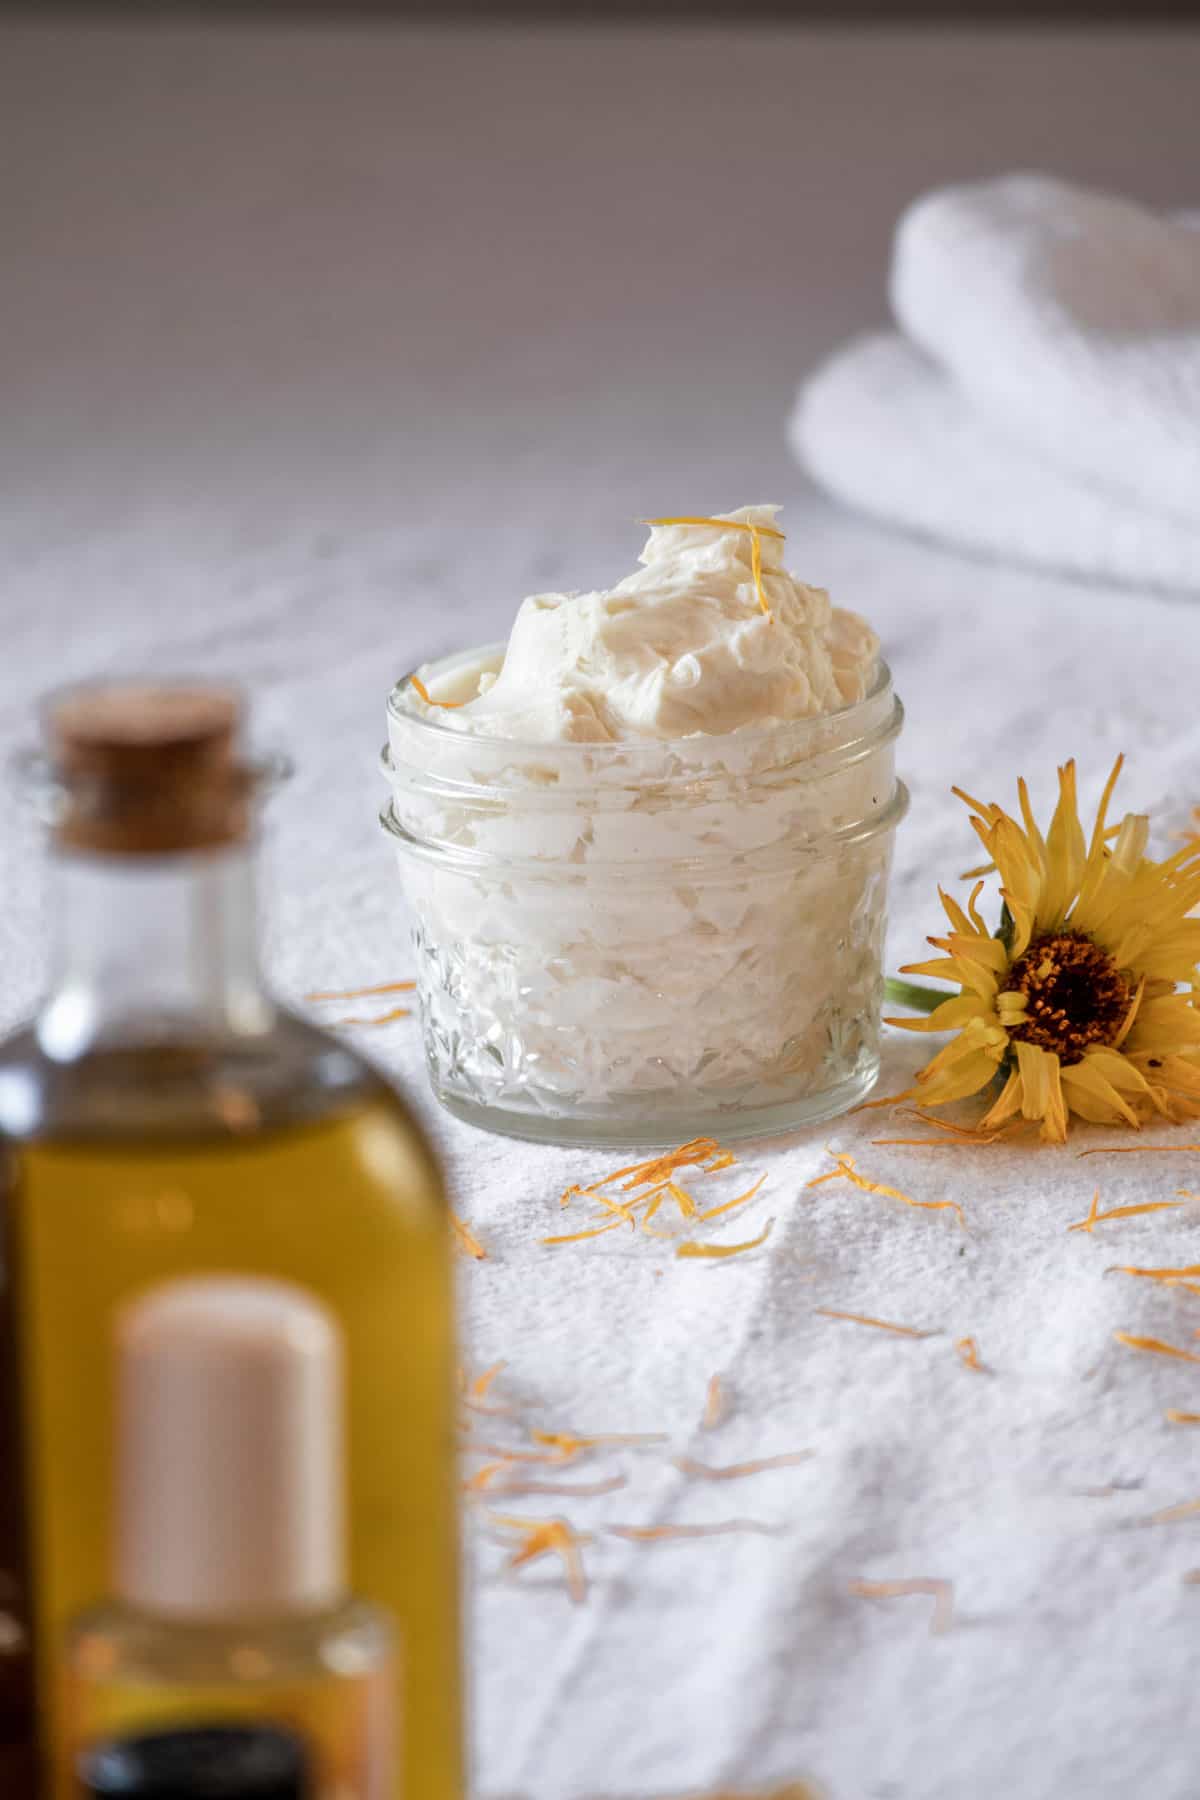 Whipped Body Butter Recipe - Oh, The Things We'll Make!